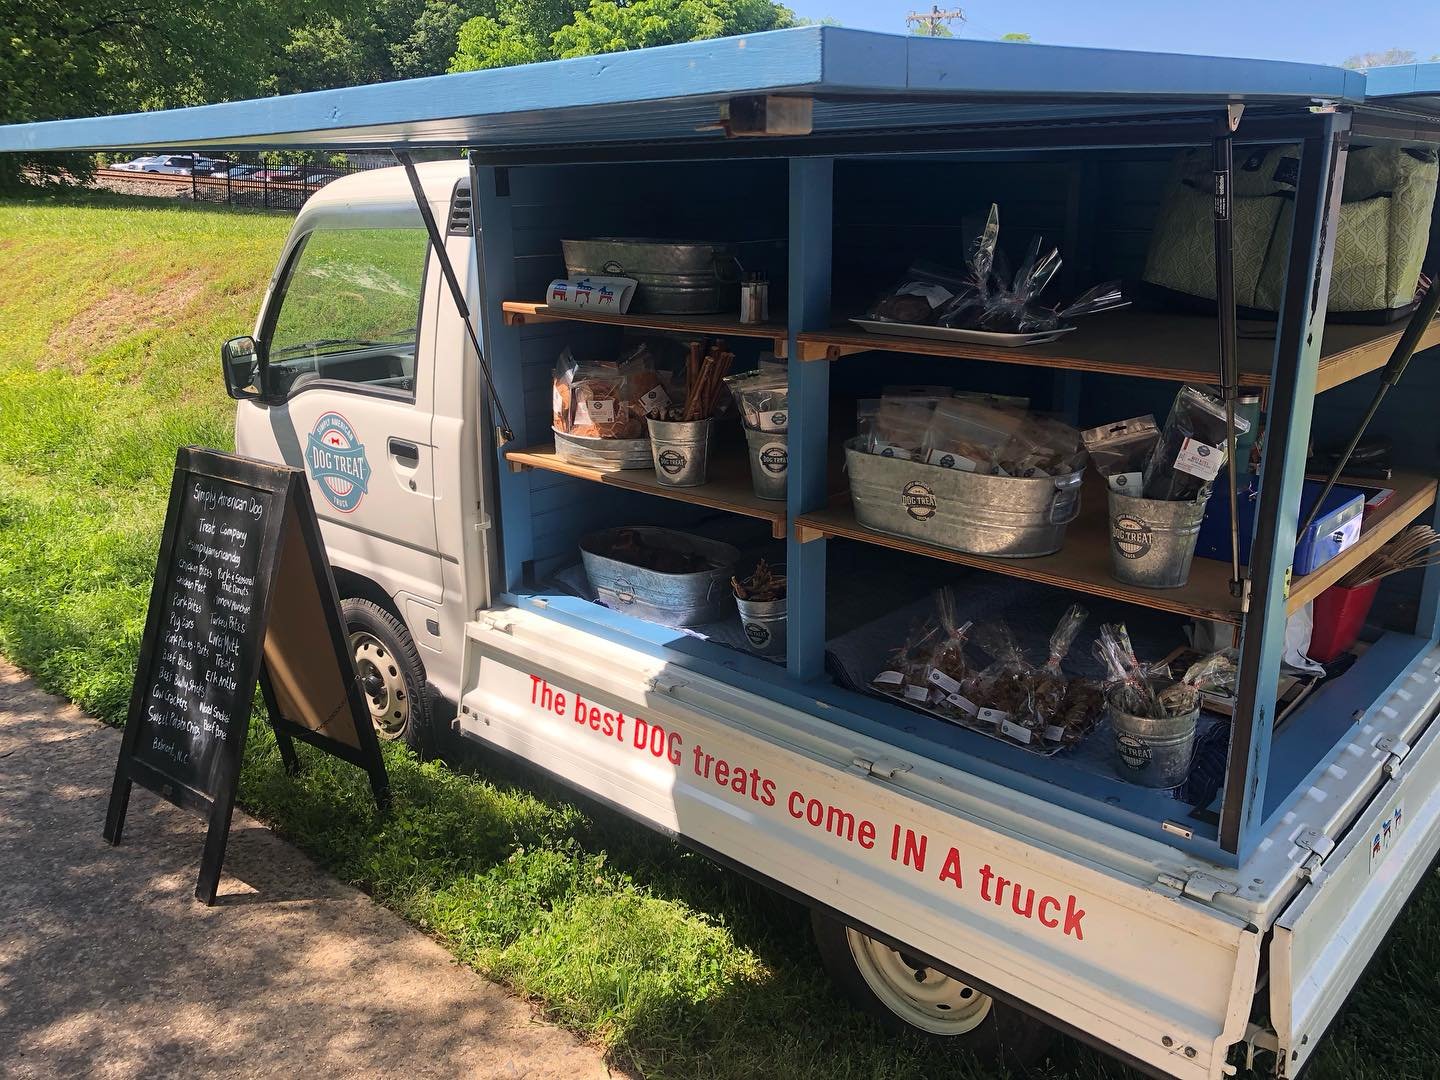 Hi Belmont friends! It&rsquo;s a beautiful day to join us in Stowe Park.  @belmontnc_farmersmarket is open for business. We have all your dogs&rsquo; favorites treats including Liver Mutt Dog Treats. We can&rsquo;t wait to see you. #dogtreats #farmer